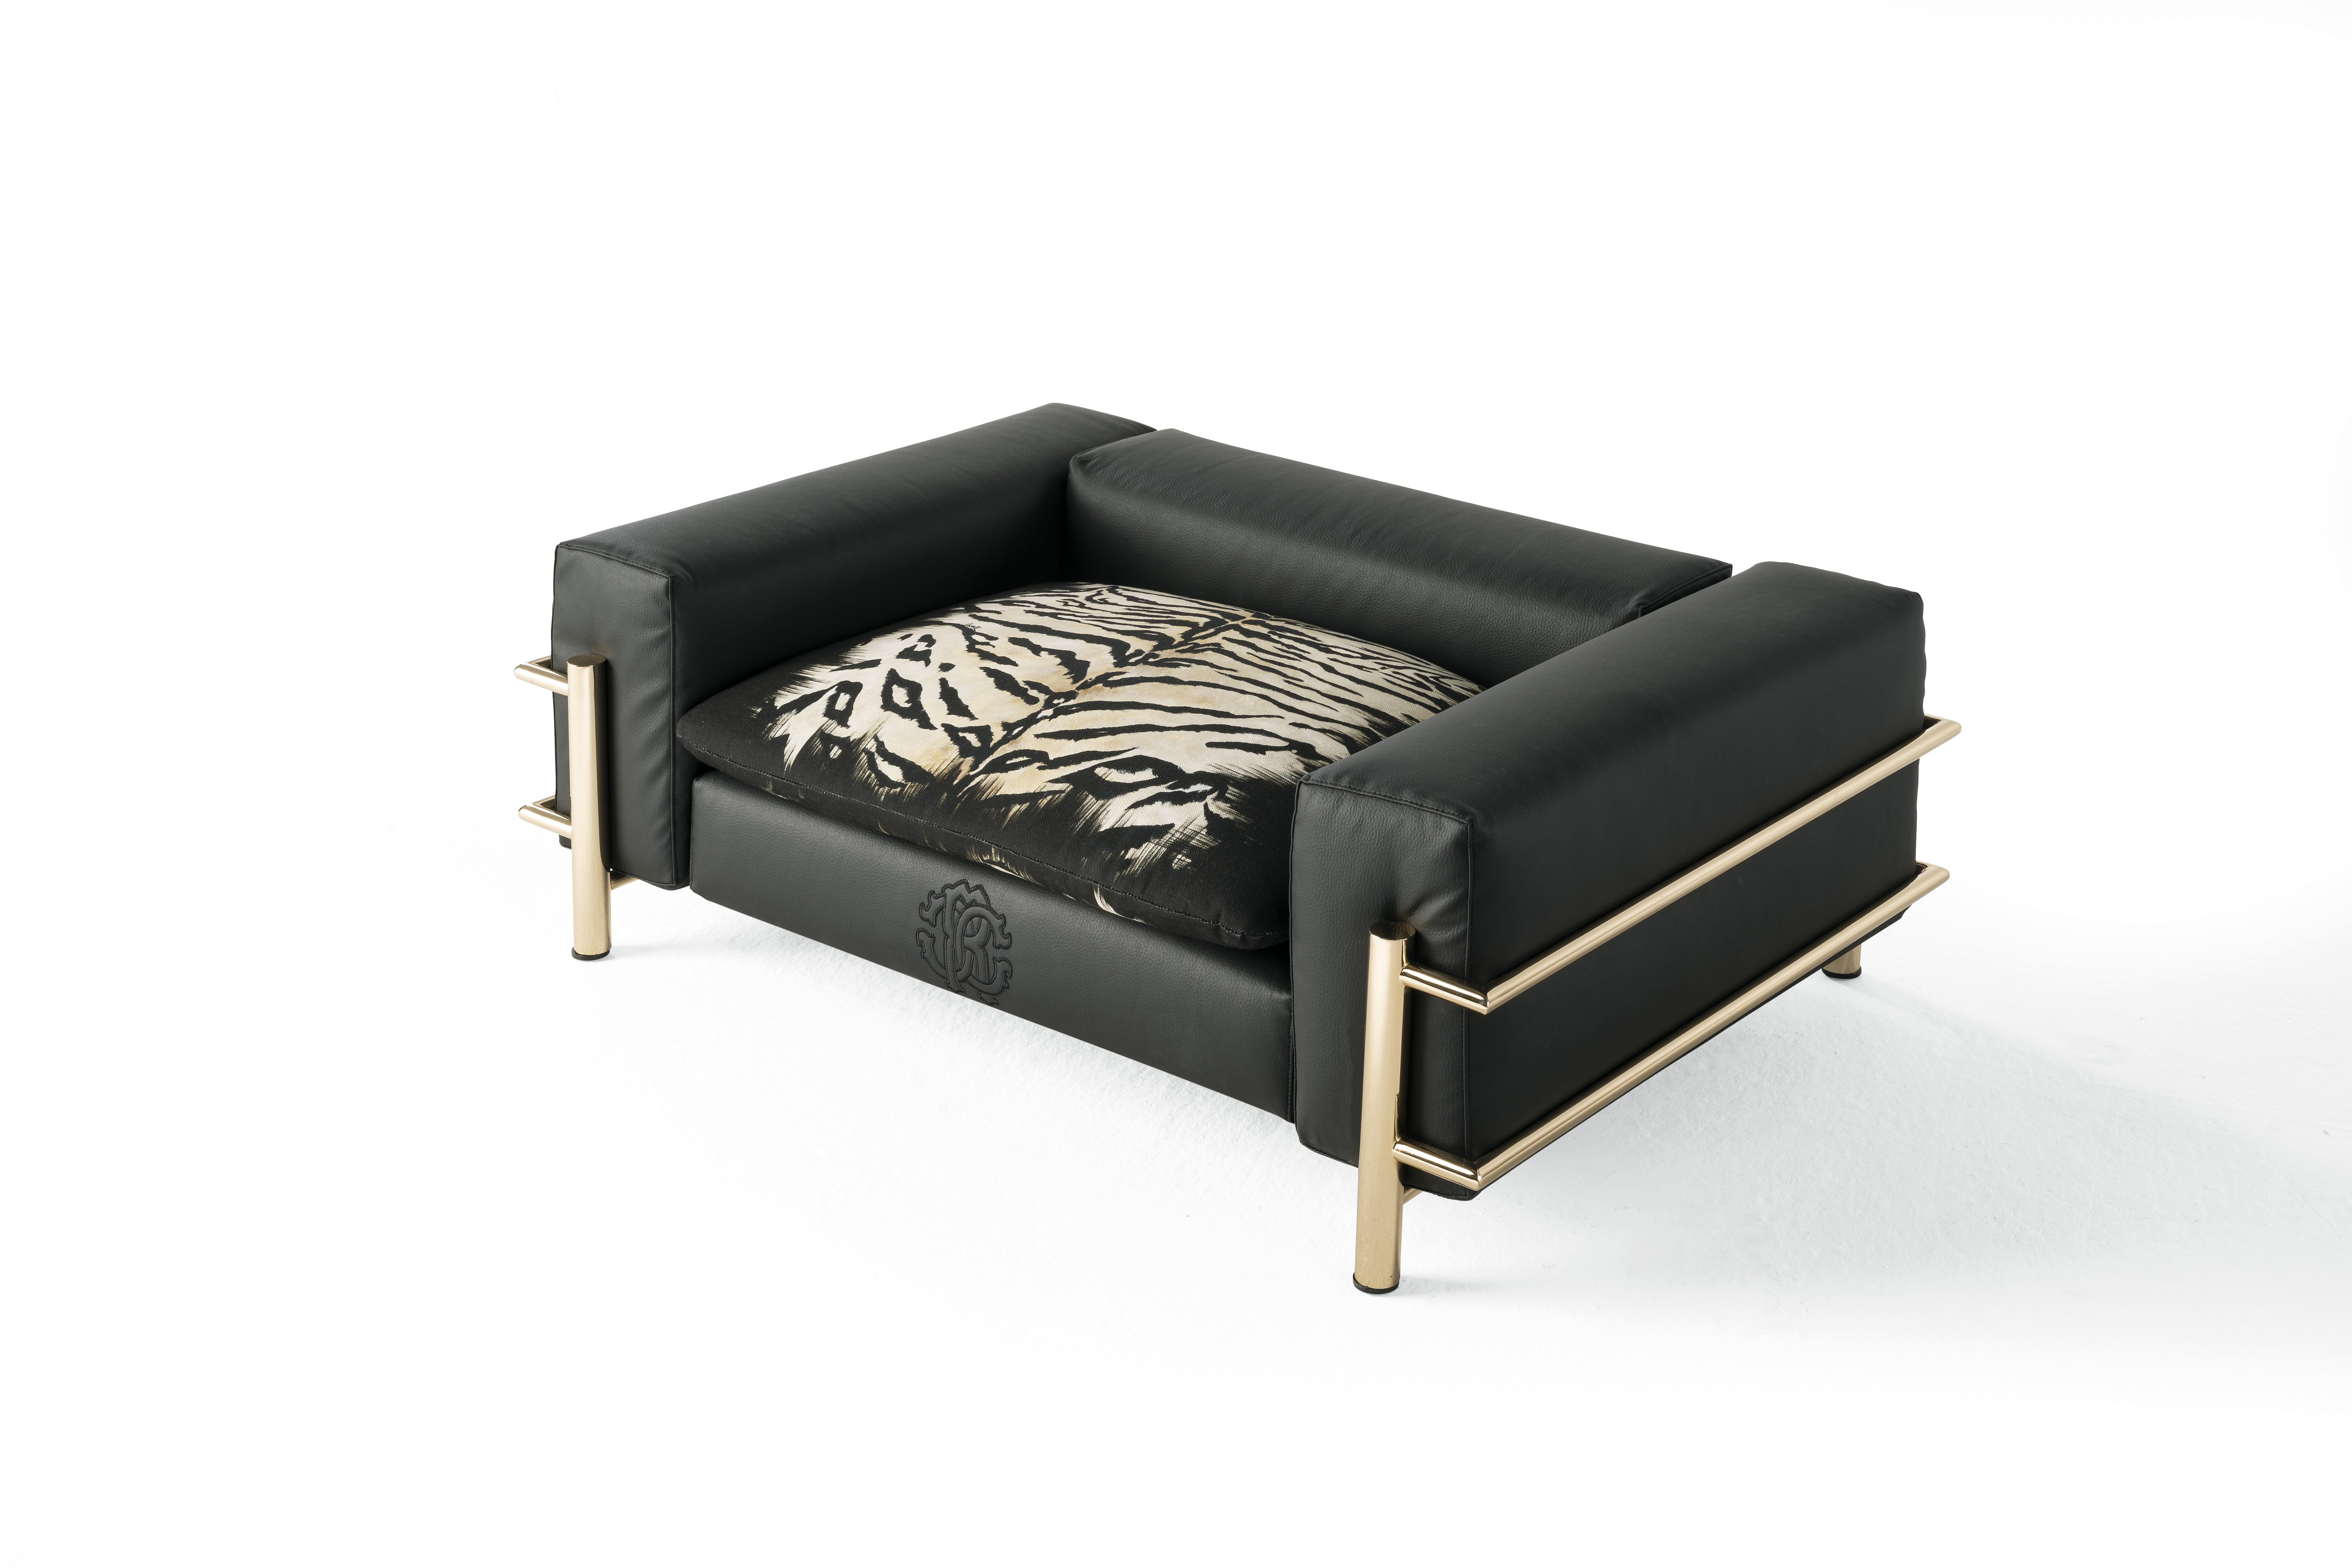 Dog bed with structure in multilayer poplar wood and polyurethane foam. Frame in iron rod with Gold finishing. External upholstery in eco-leather col. Black.
Internal cushion with removable cover in fabric Canvas RC Wild Tiger col. Natural.